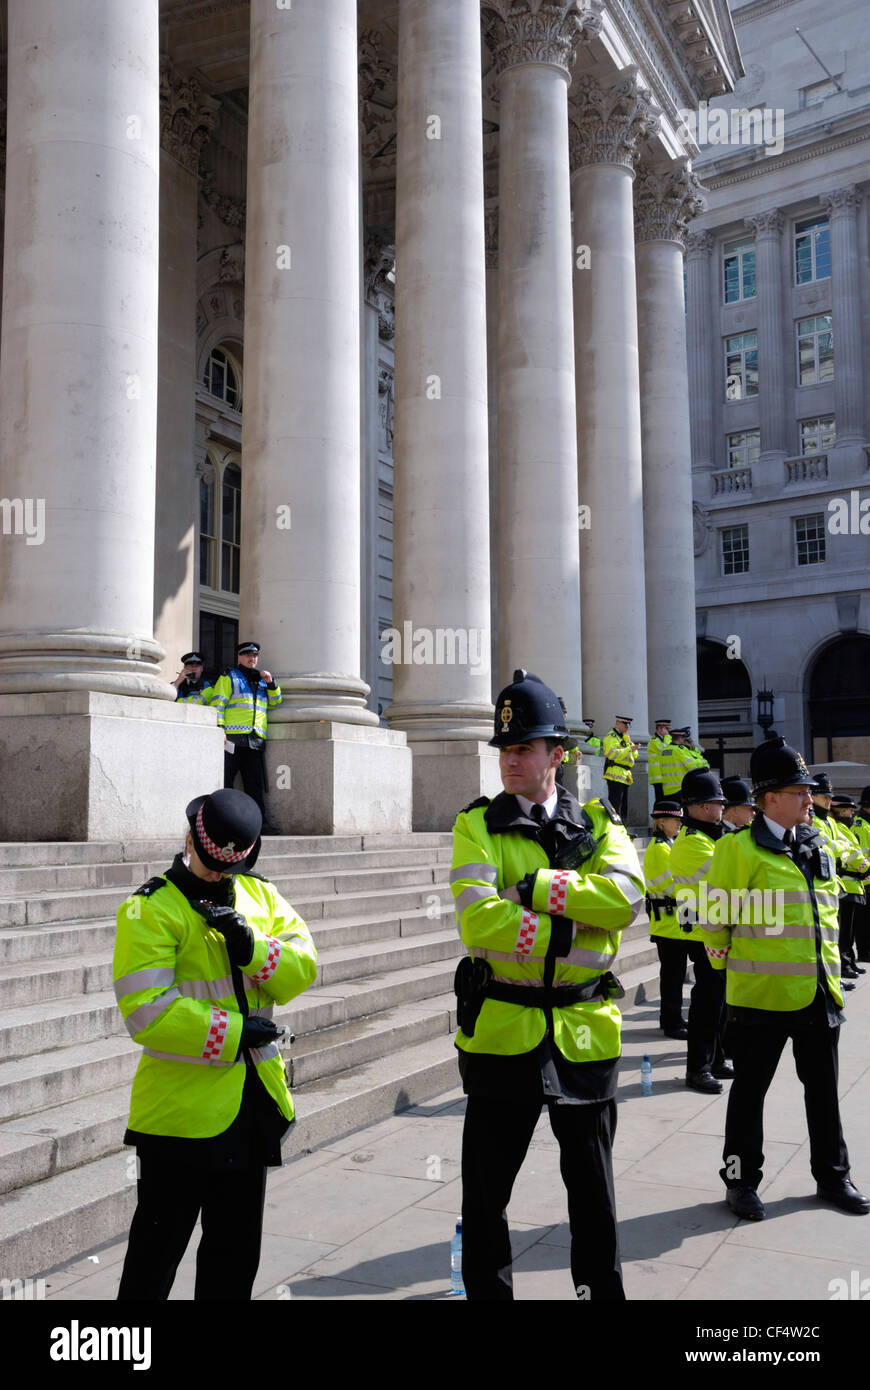 Police guarding the Royal Exchange during the G20 demonstrations in the City of London. Stock Photo